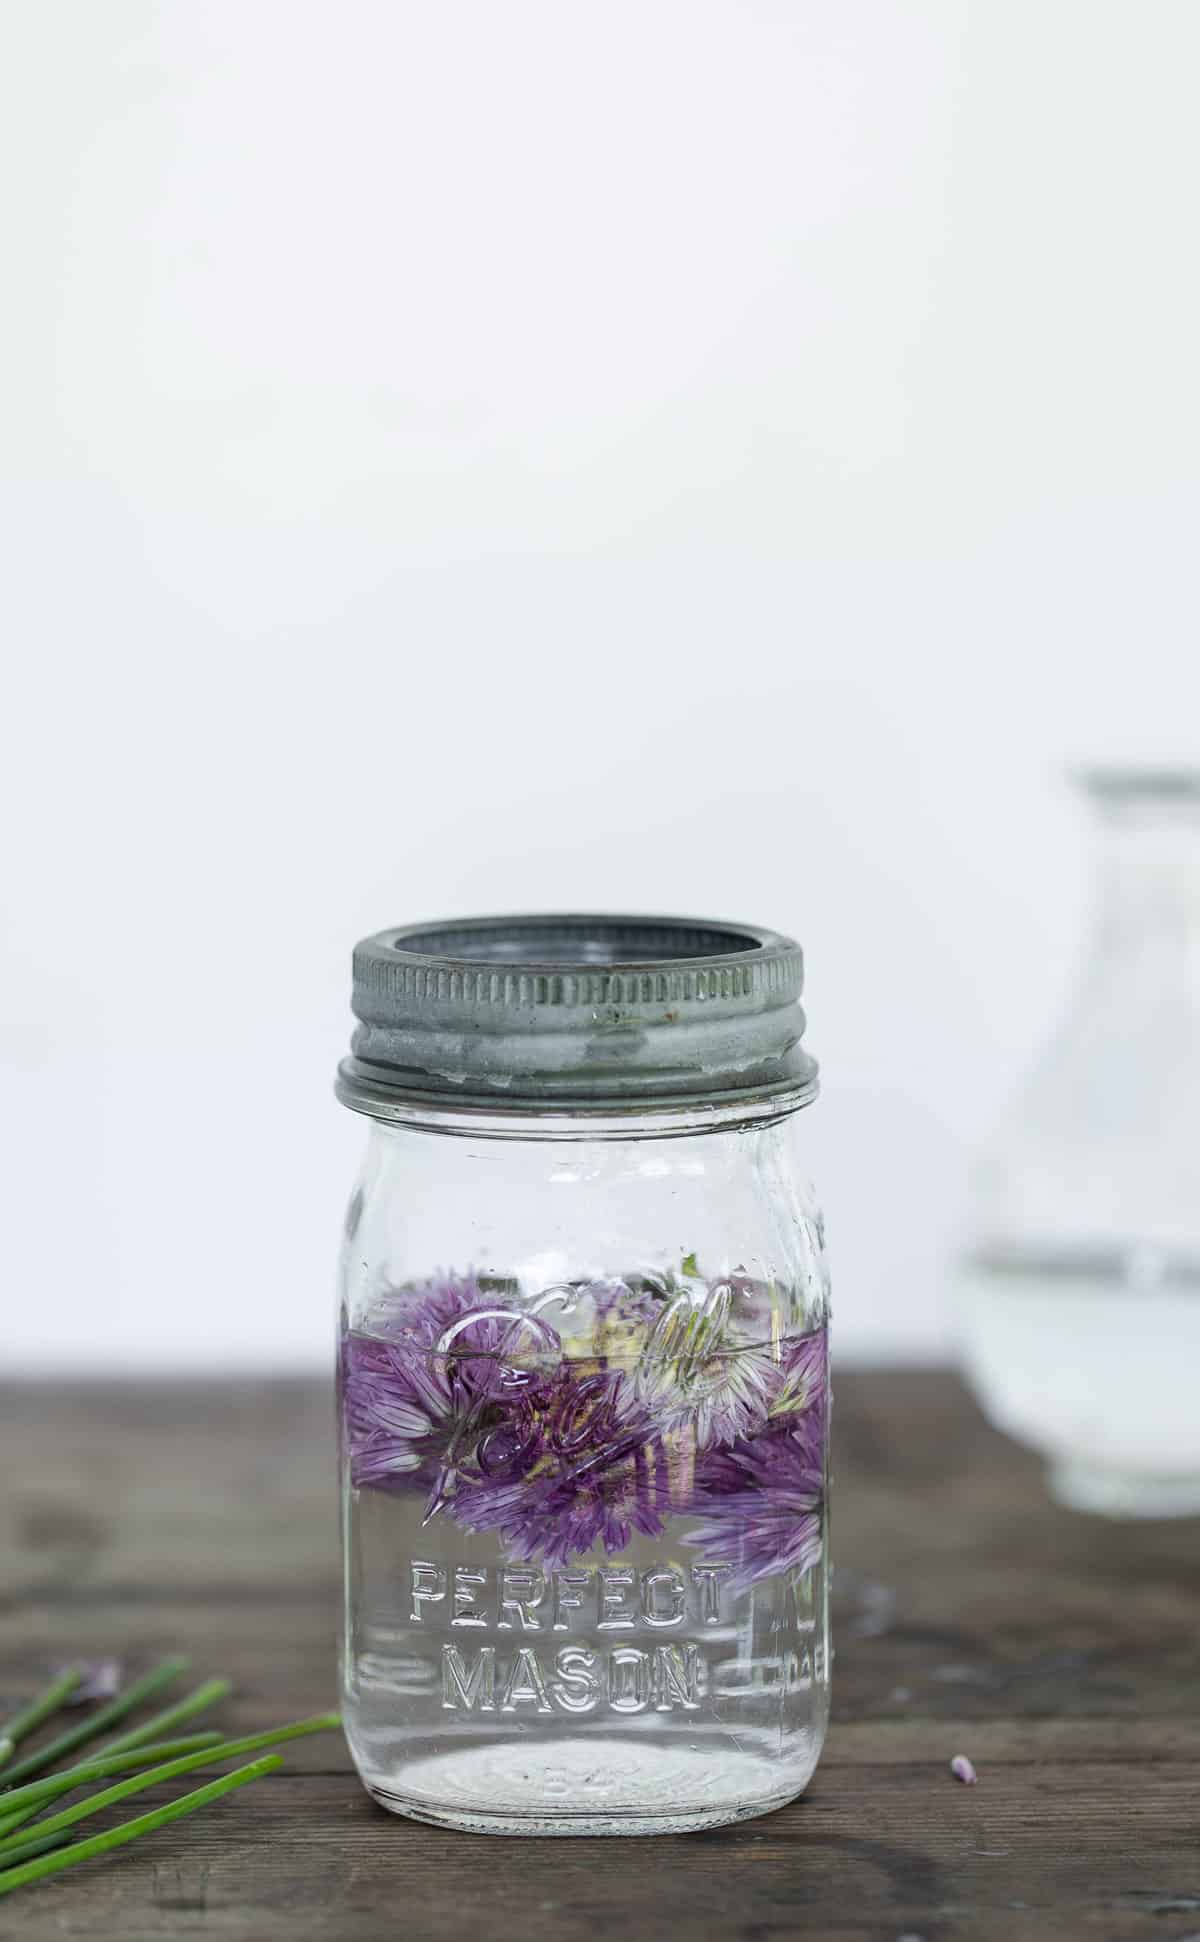 To make pickled chive blossoms simply add steeped blossoms to a small jar and fill with a mixture of vinegar, water, sugar and salt. Refrigerate and consume pickled chive blossoms within a week.